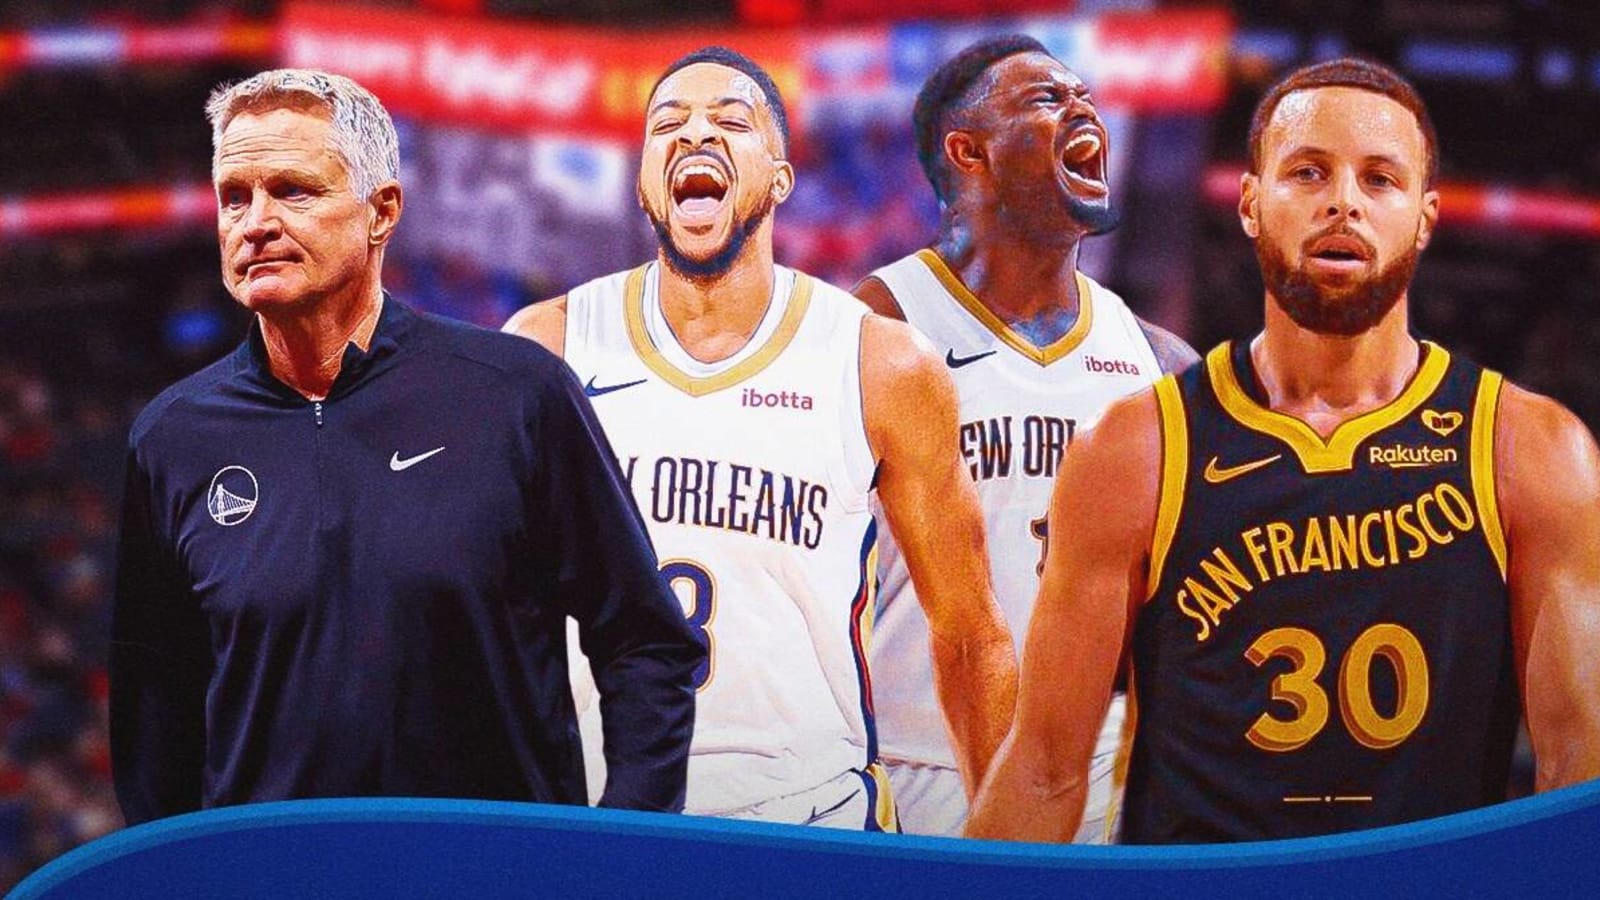 Stephen Curry, Warriors facing play-in ‘gauntlet’ after crucial loss to Pelicans